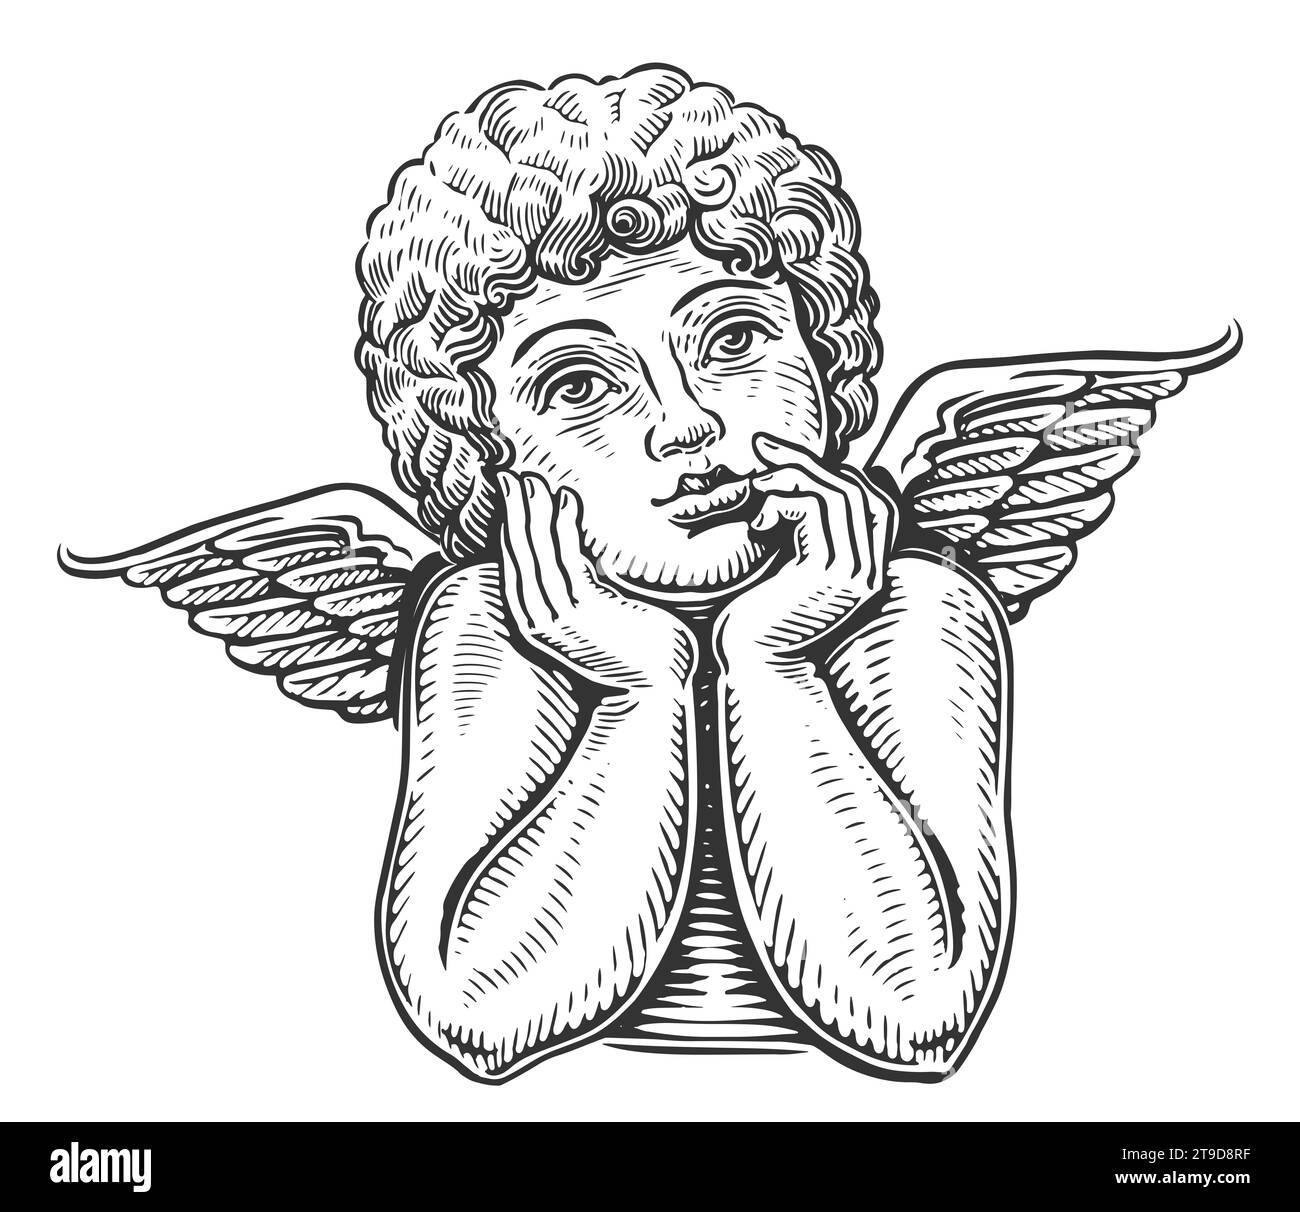 Pensive cute angel child. Hand drawn sketch vintage illustration. Cute baby with wings Stock Photo